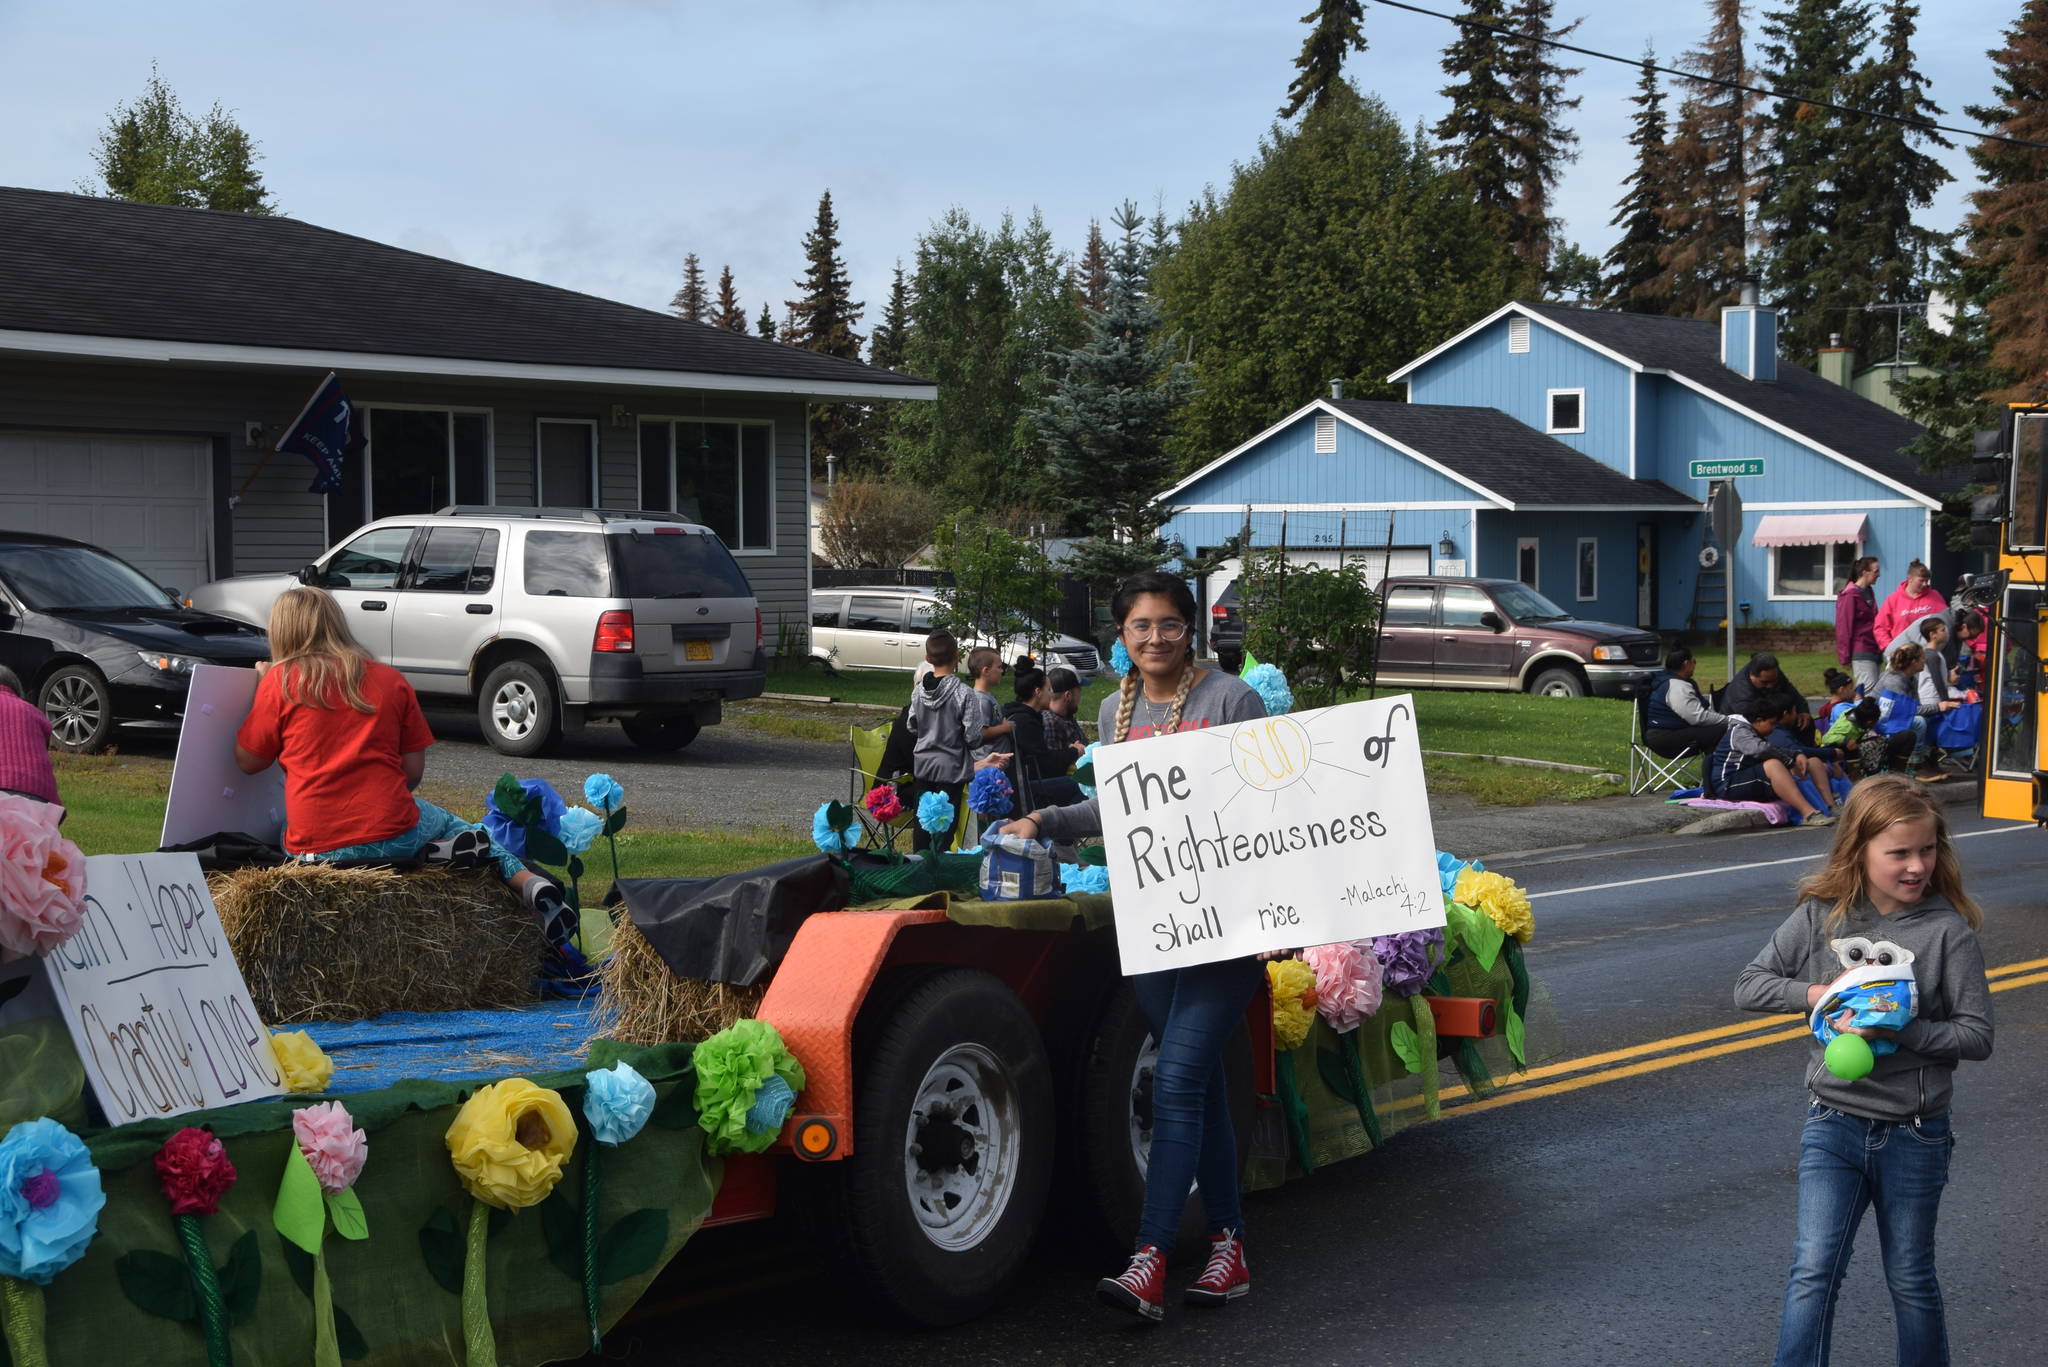 Volunteers from the Our Lady of Perpetual Help Catholic Church smile for the camera during Soldotna’s Progress Day Parade in Soldotna, Alaska on July 27, 2019. (Photo by Brian Mazurek/Peninsula Clarion)                                Volunteers from the Our Lady of Perpetual Help Catholic Church smile for the camera during Soldotna’s Progress Day Parade in Soldotna, Alaska on July 27, 2019. (Photo by Brian Mazurek/Peninsula Clarion)